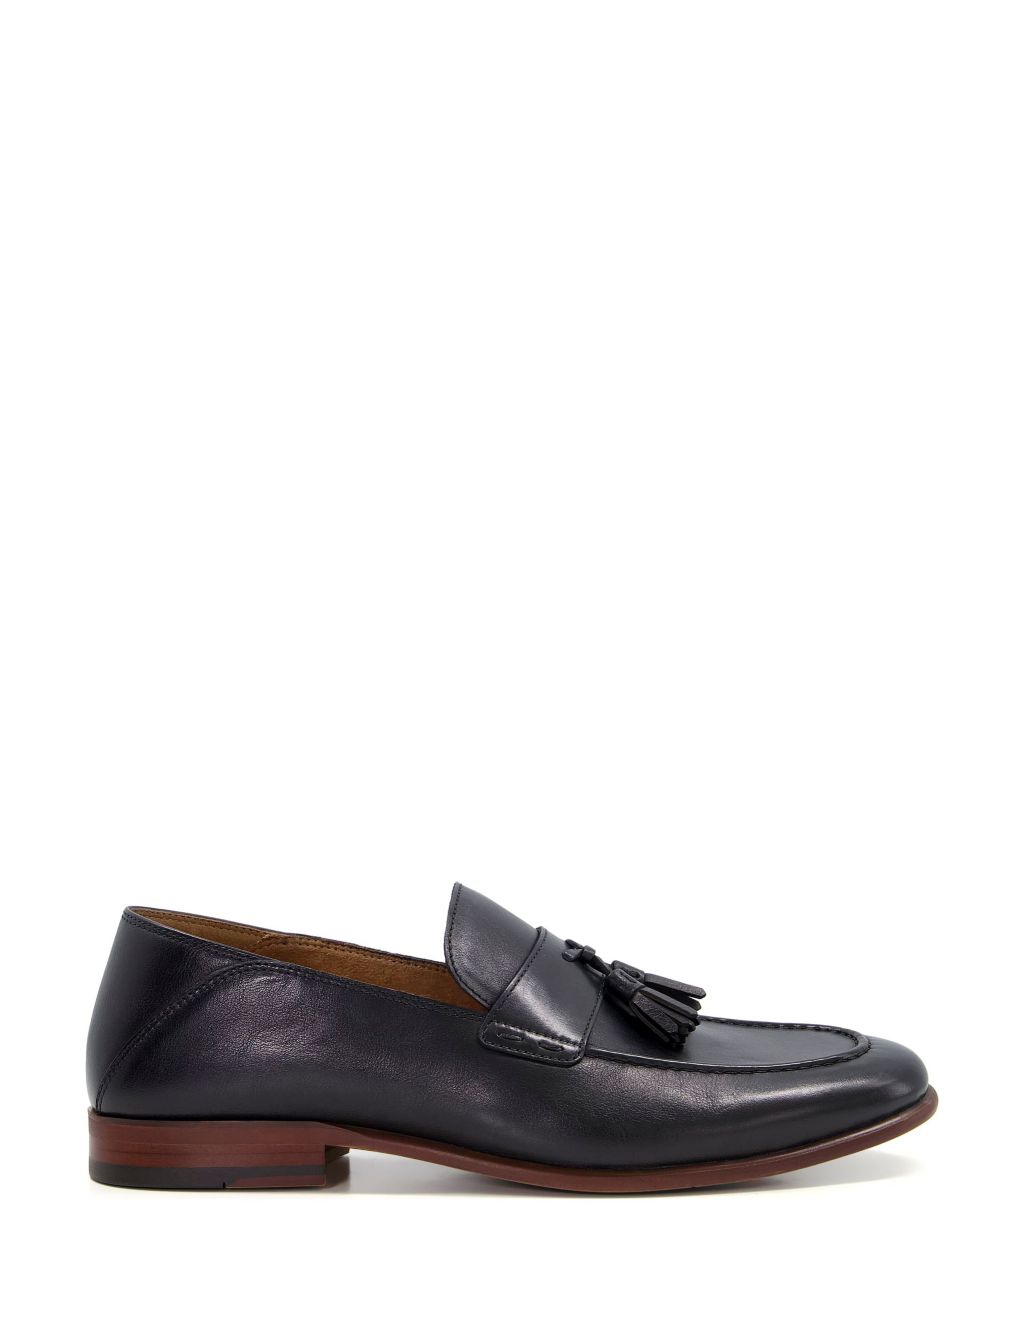 Leather Slip-On Loafers | Dune London | M&S